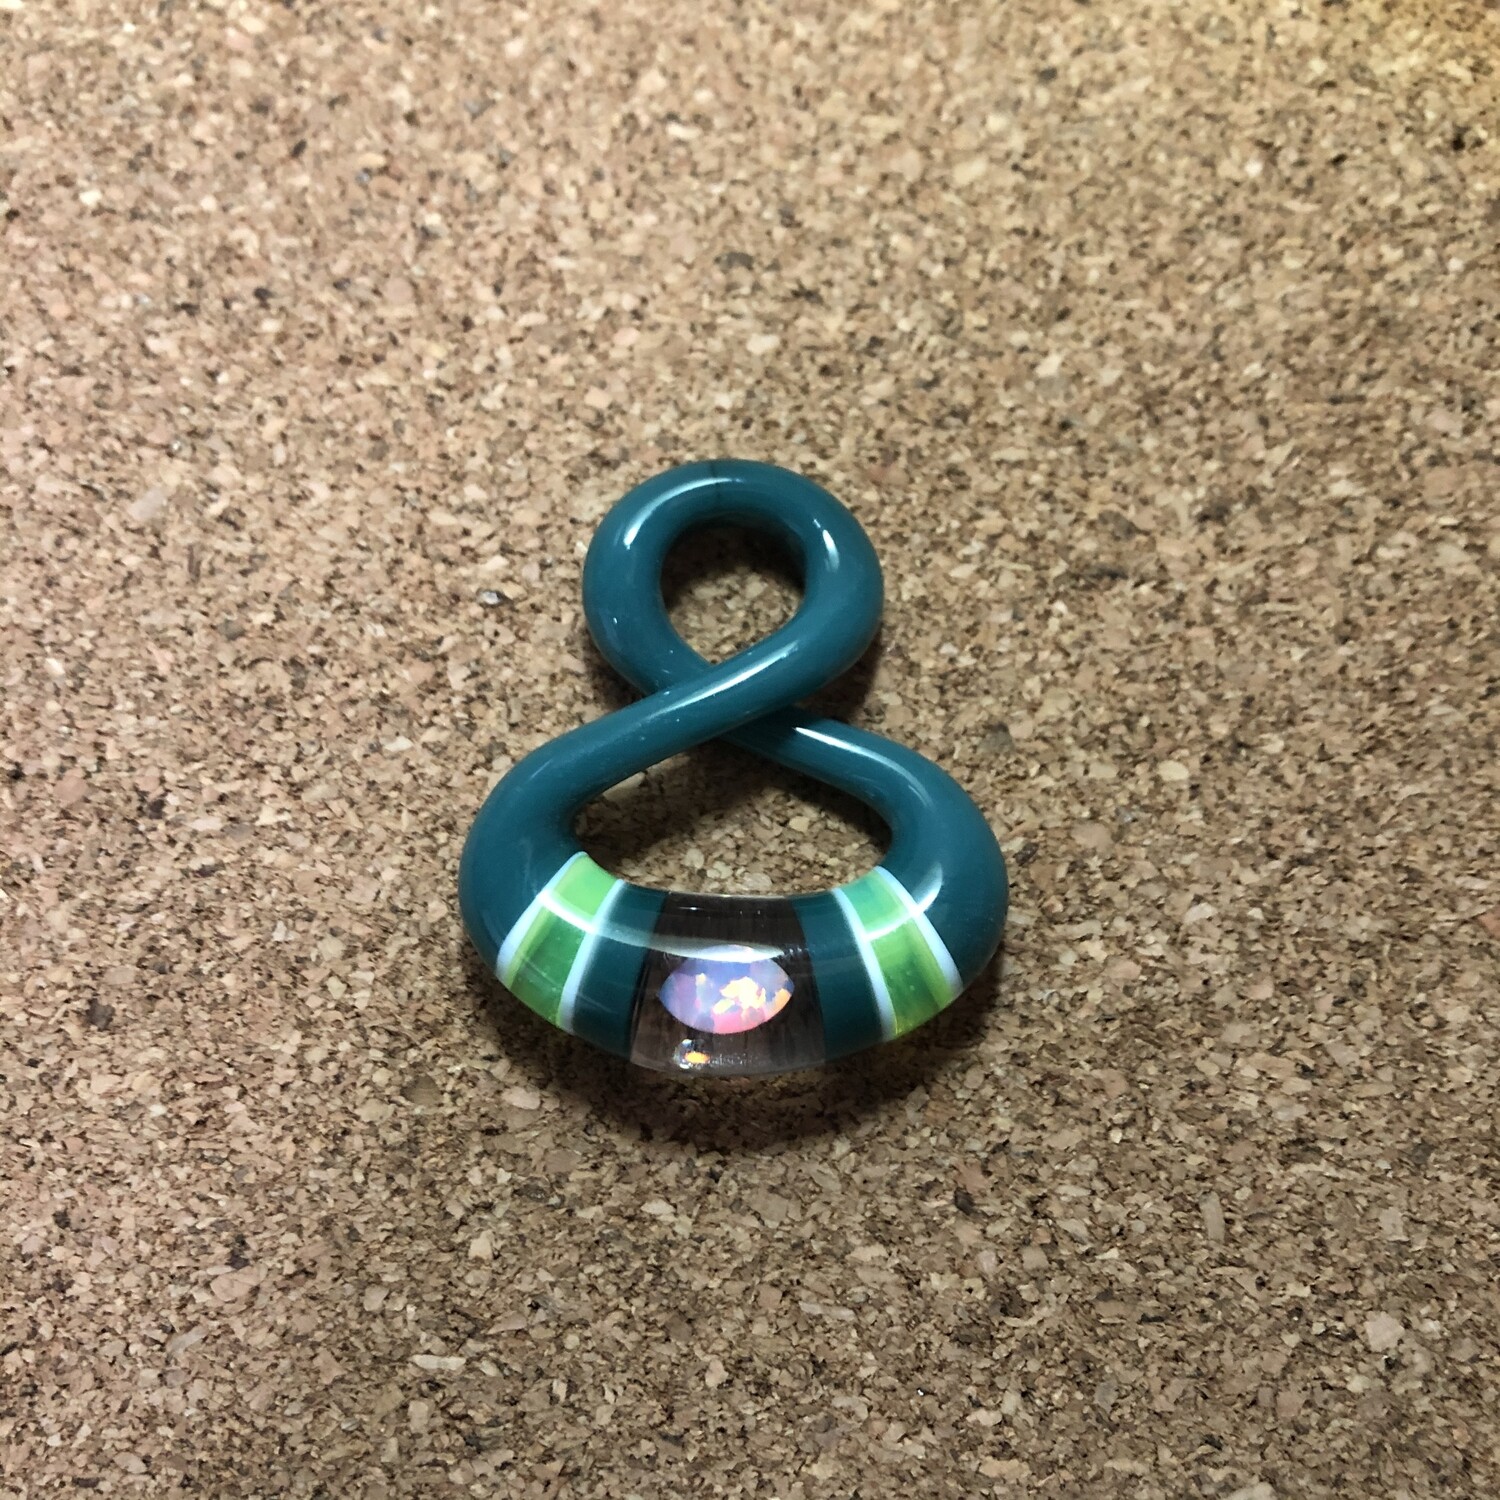 Aqua Azul / Slime / Lotus Worked Full Size Infinity Pendant w/ Marquise Opal by NateyLove